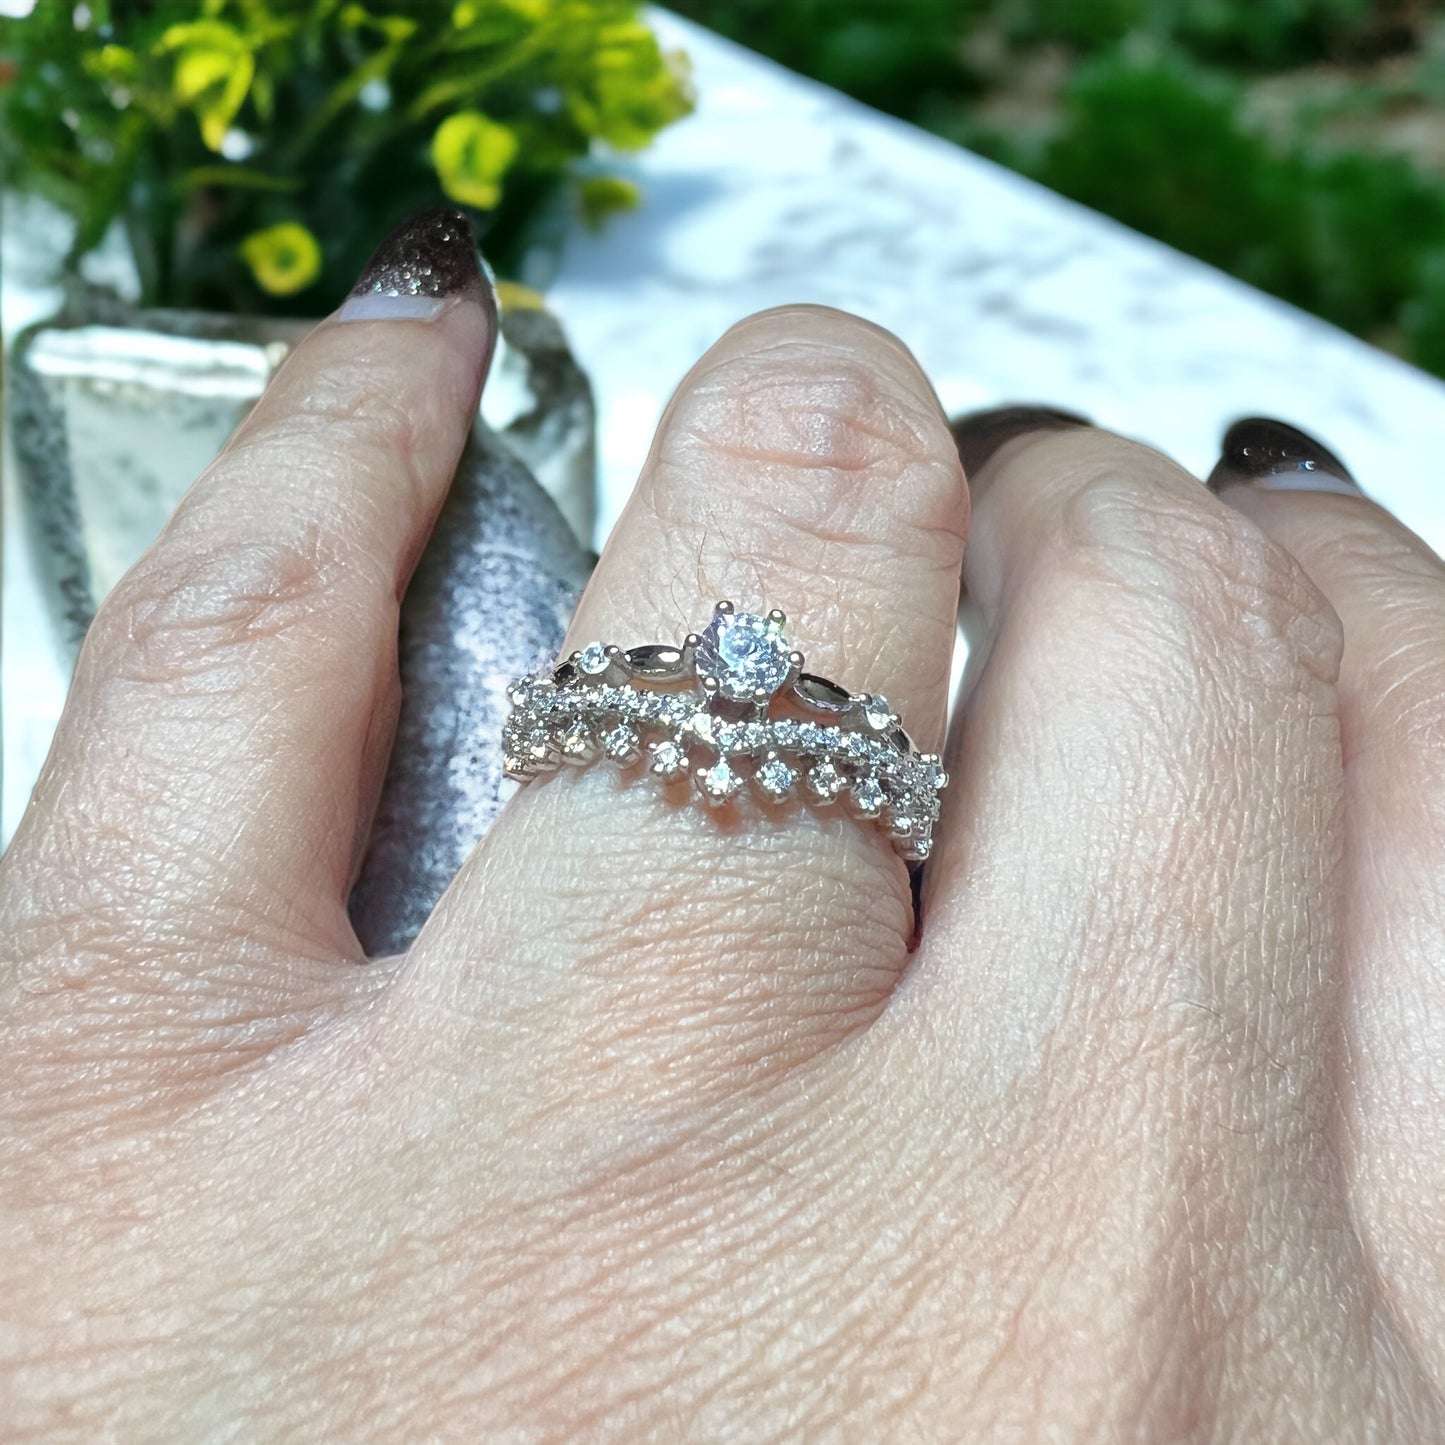 Dainty Tiara Elegance: Silver Rings for Women – Subtle Royalty in Every Sparkling Detail